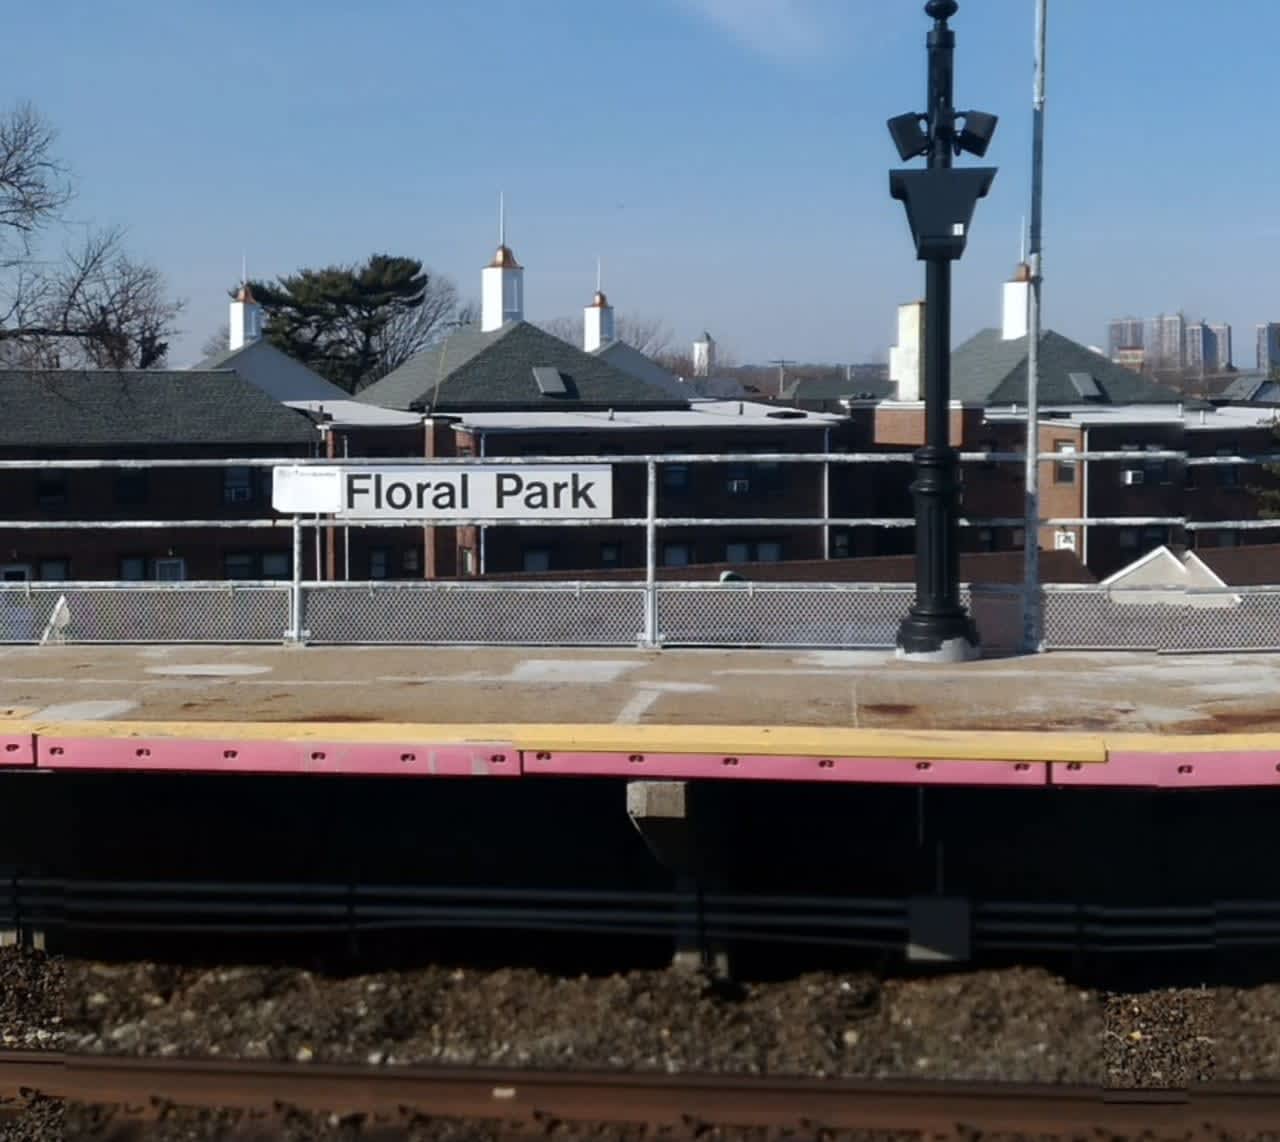 A body was found on the tracks at the Floral Park train station on Long Island.